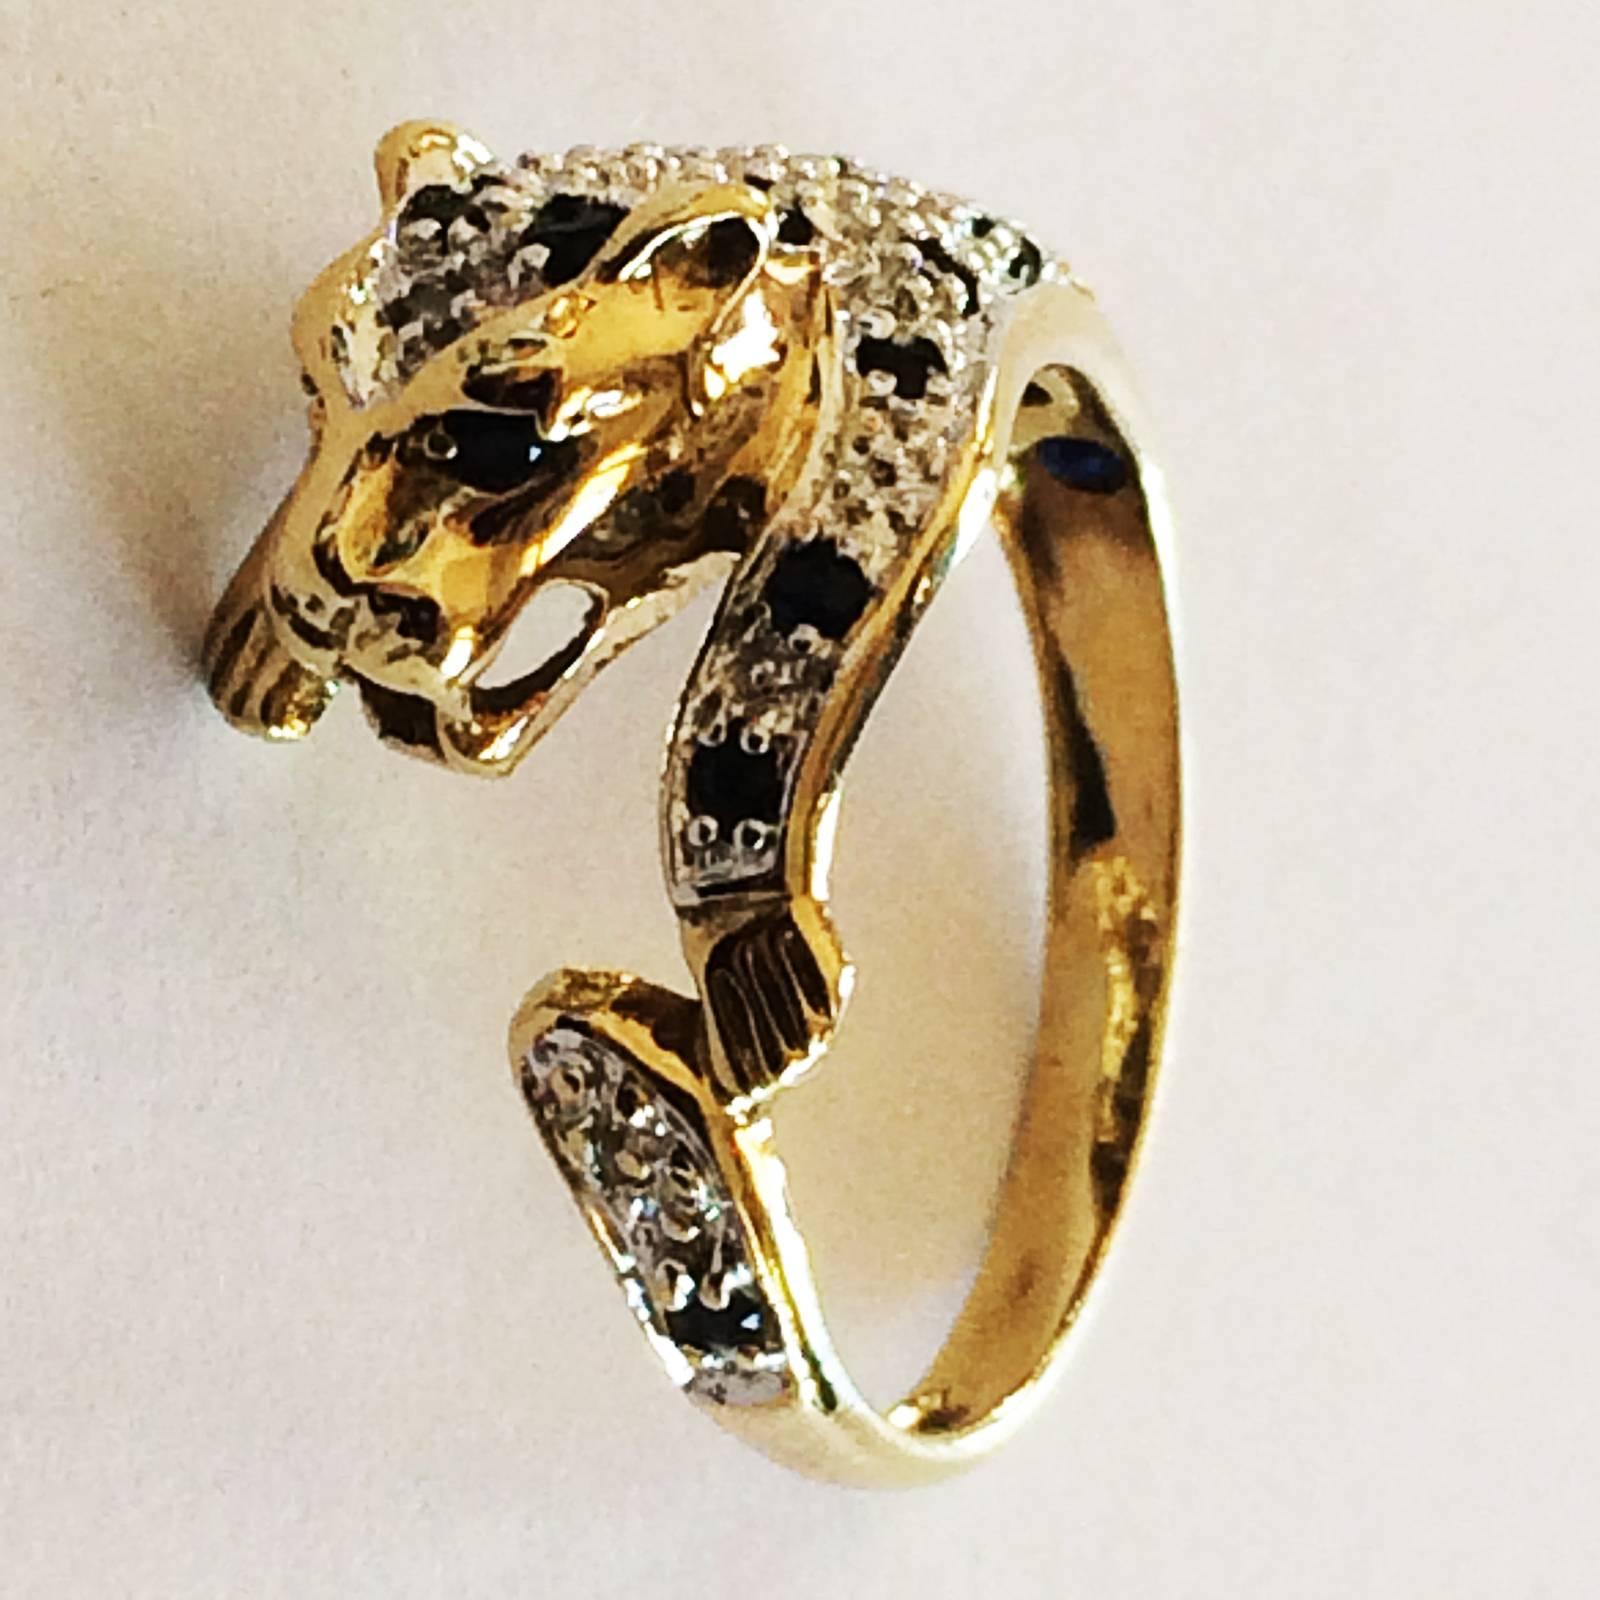 Mid Century ring in form of a spotted Leopard, 9ct Gold, 375, as Hallmarked to inner Band. Designed in a Swirl pattern with the Left Paw just touching the tail, all decorated with small Diamonds and dark blue sapphires creating the Spots. The